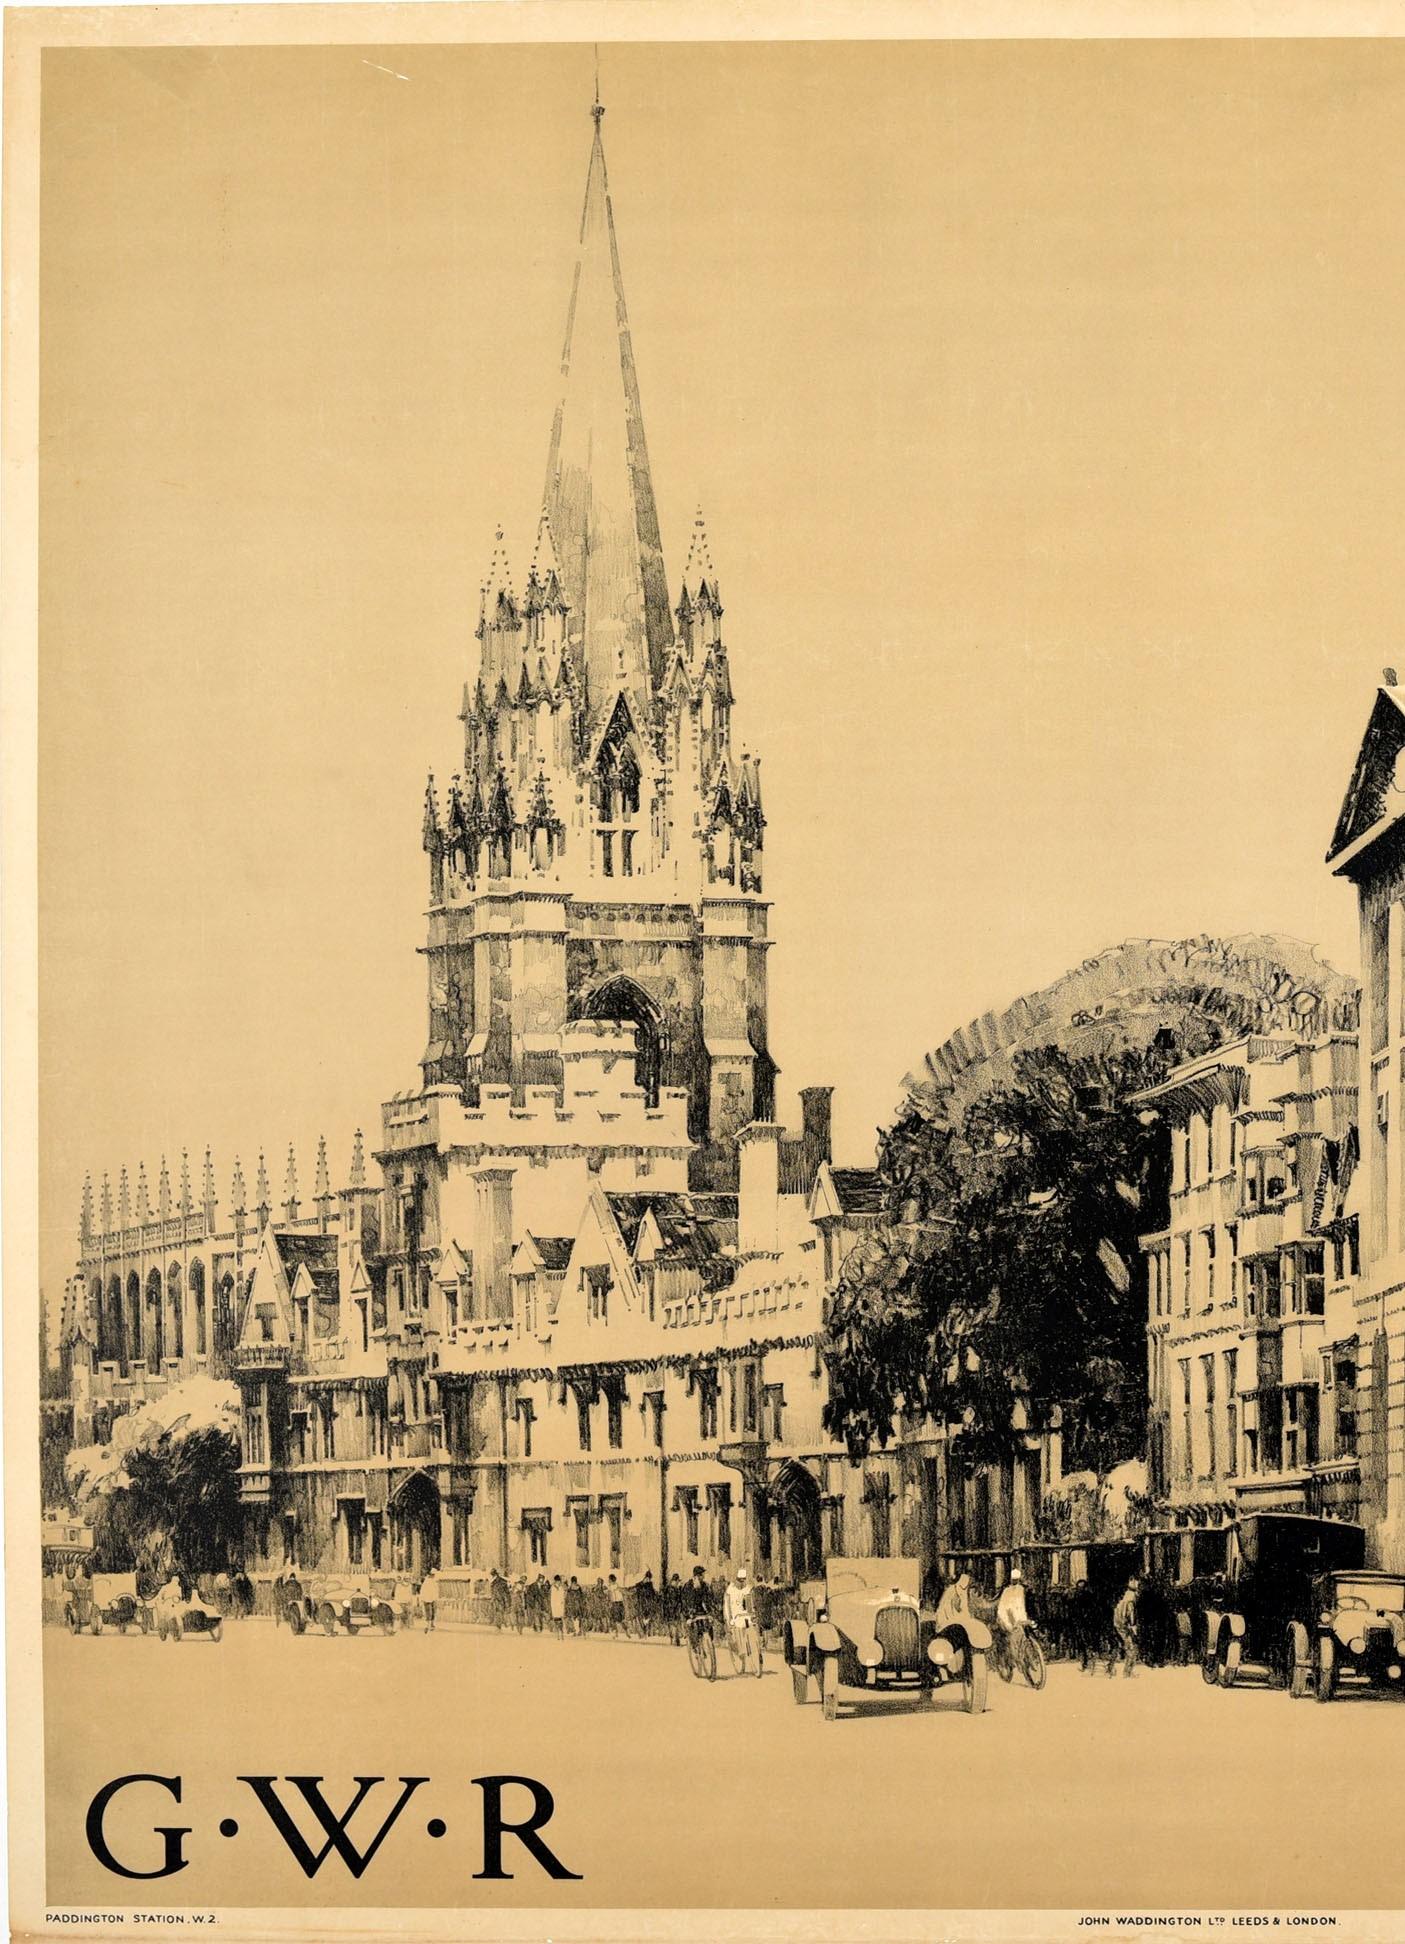 Original vintage railway poster published by GWR Great Western Railway featuring a stunning sketch illustration by Fred Taylor (1875-1963) of the Oxford University Church of St Mary the Virgin depicting people walking by the trees and grand historic